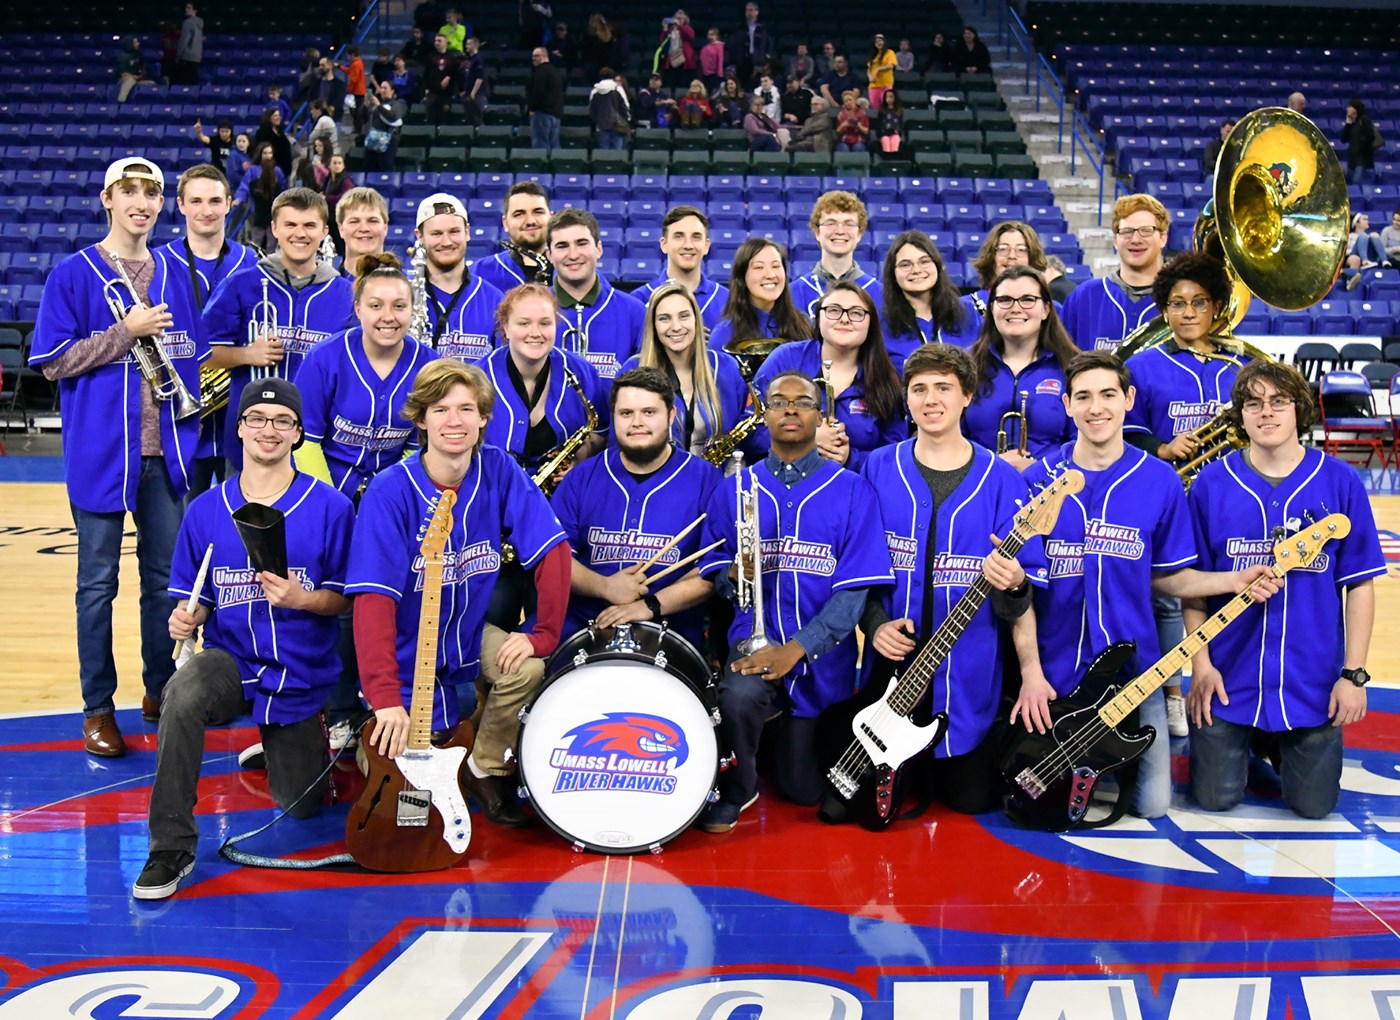  The UMass Lowell Basketball Pep Band is posed on center court wearing their royal blue short sleeved River Hawks Pep band shirts, with woodwind, brass and rhythm instruments like guitar and drums in hand.